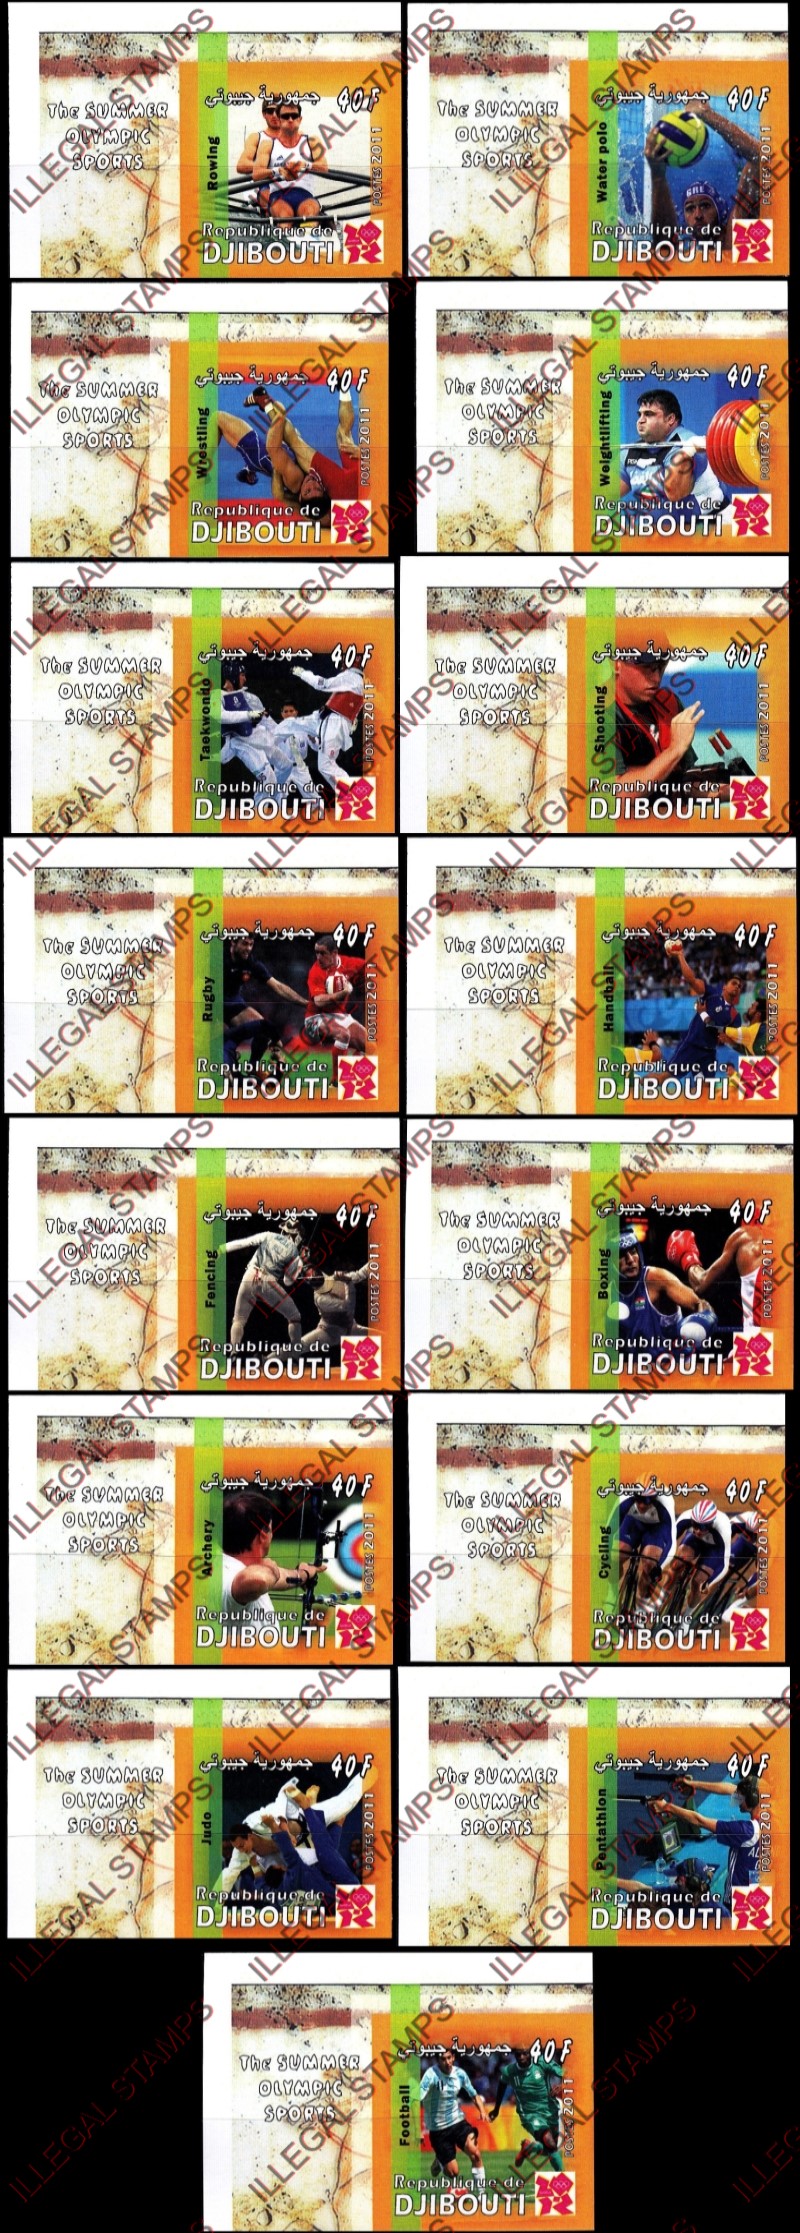 Djibouti 2011 Summer Olympic Games Illegal Stamp Deluxe Sheets of 1